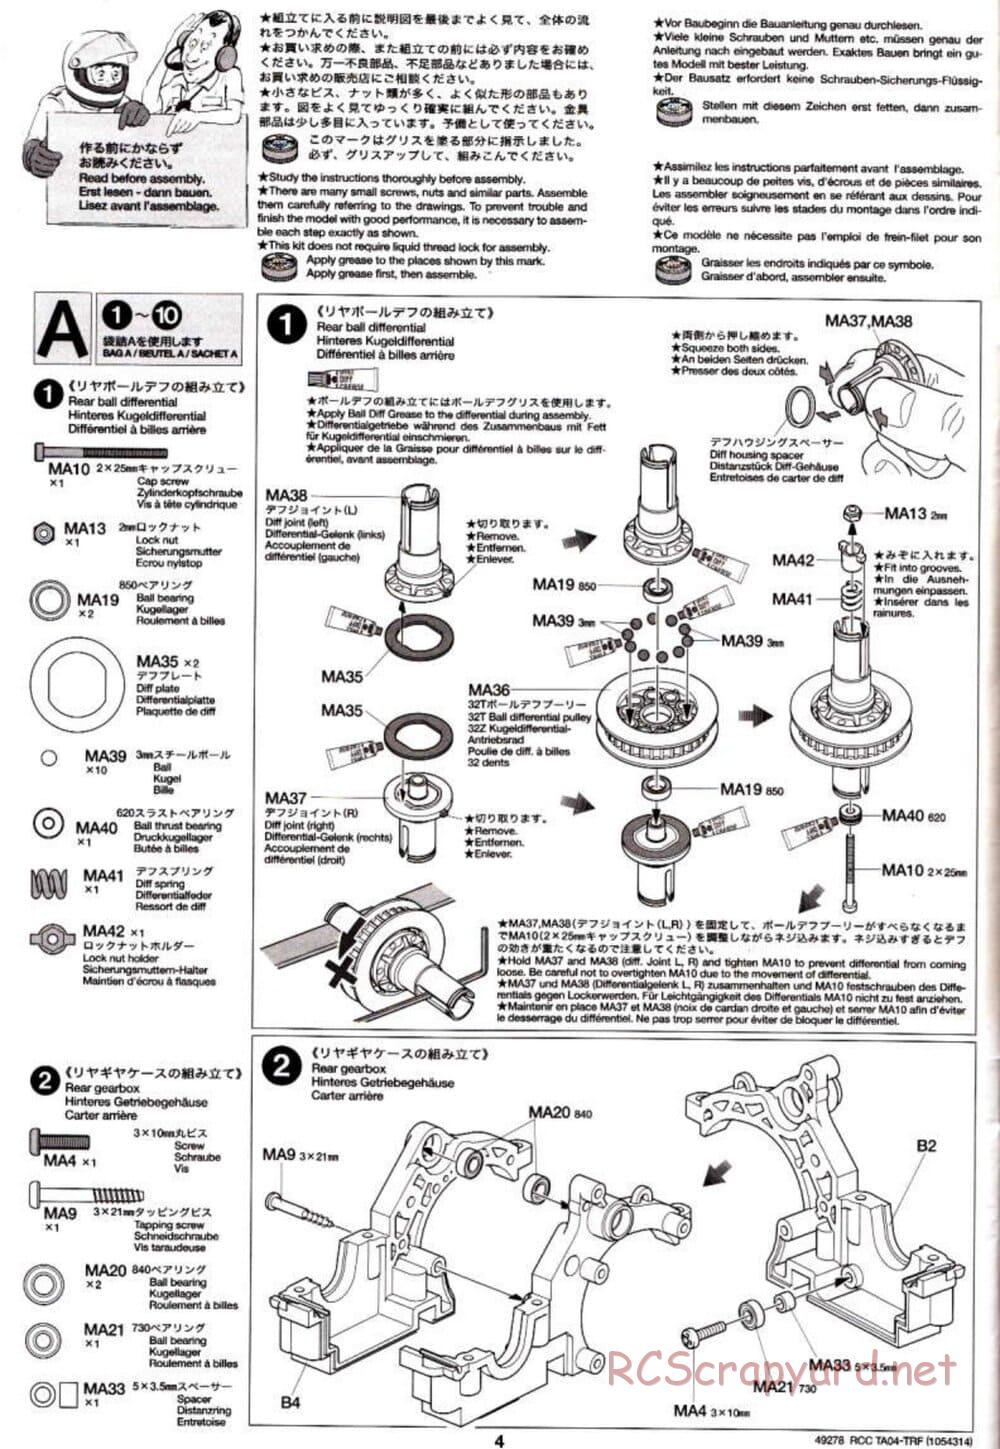 Tamiya - TA-04 TRF Special Chassis Chassis - Manual - Page 4